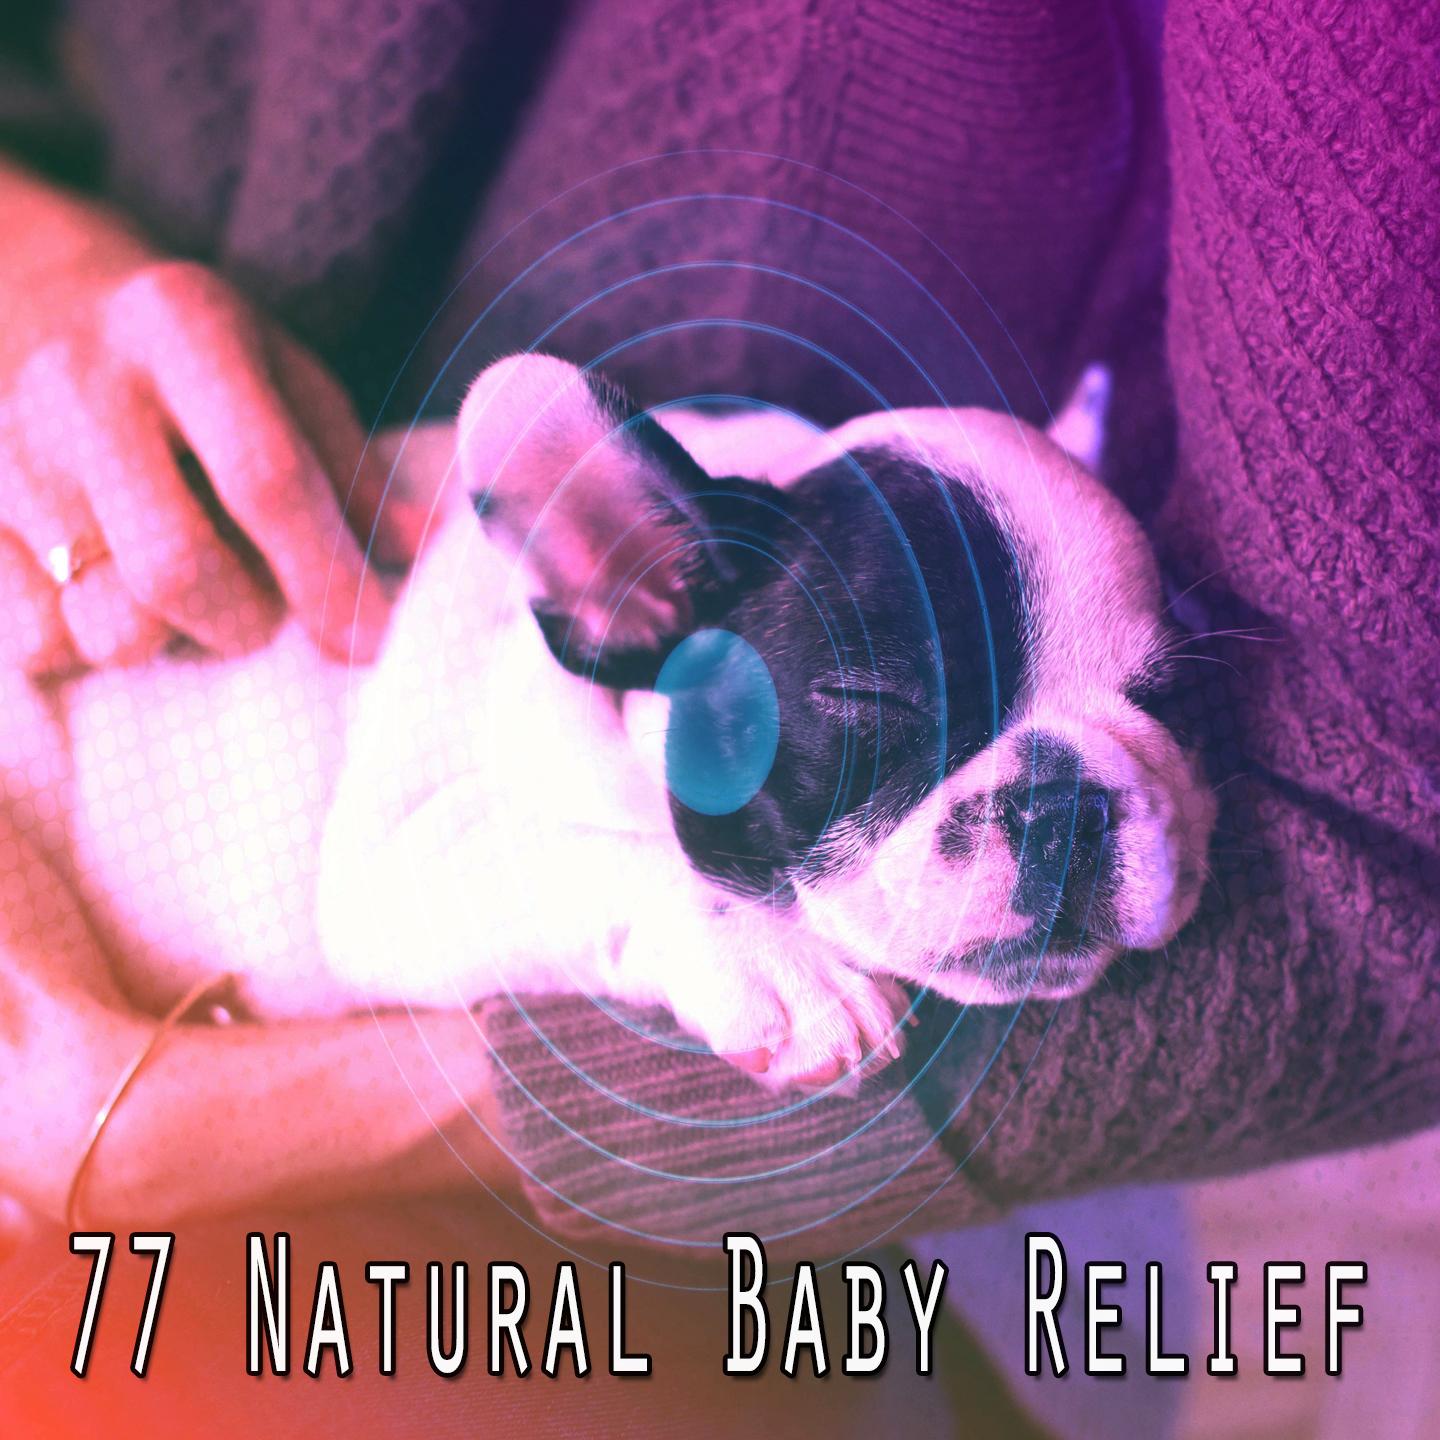 77 Natural Baby Relief